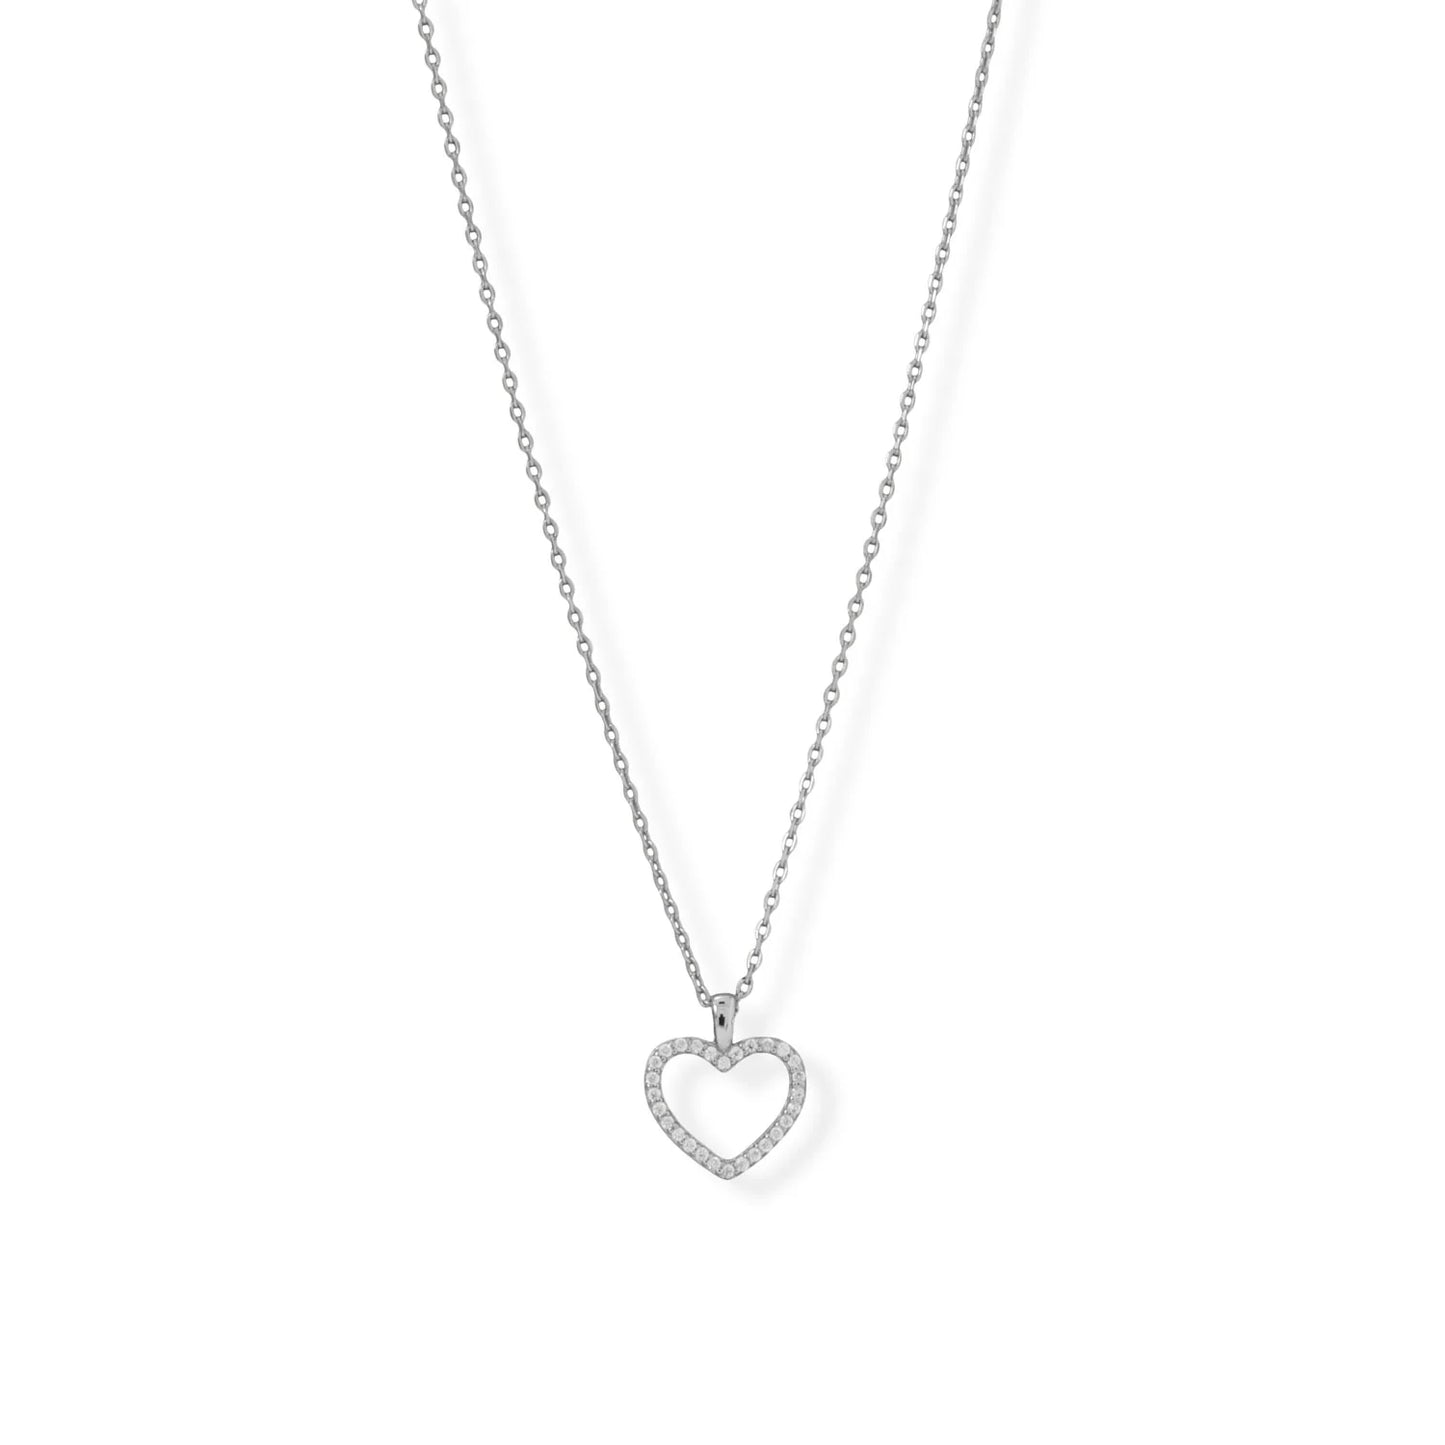 Sterling Silver Cubic Zirconia Heart Necklace for Women - M H W ACCESSORIES LLC